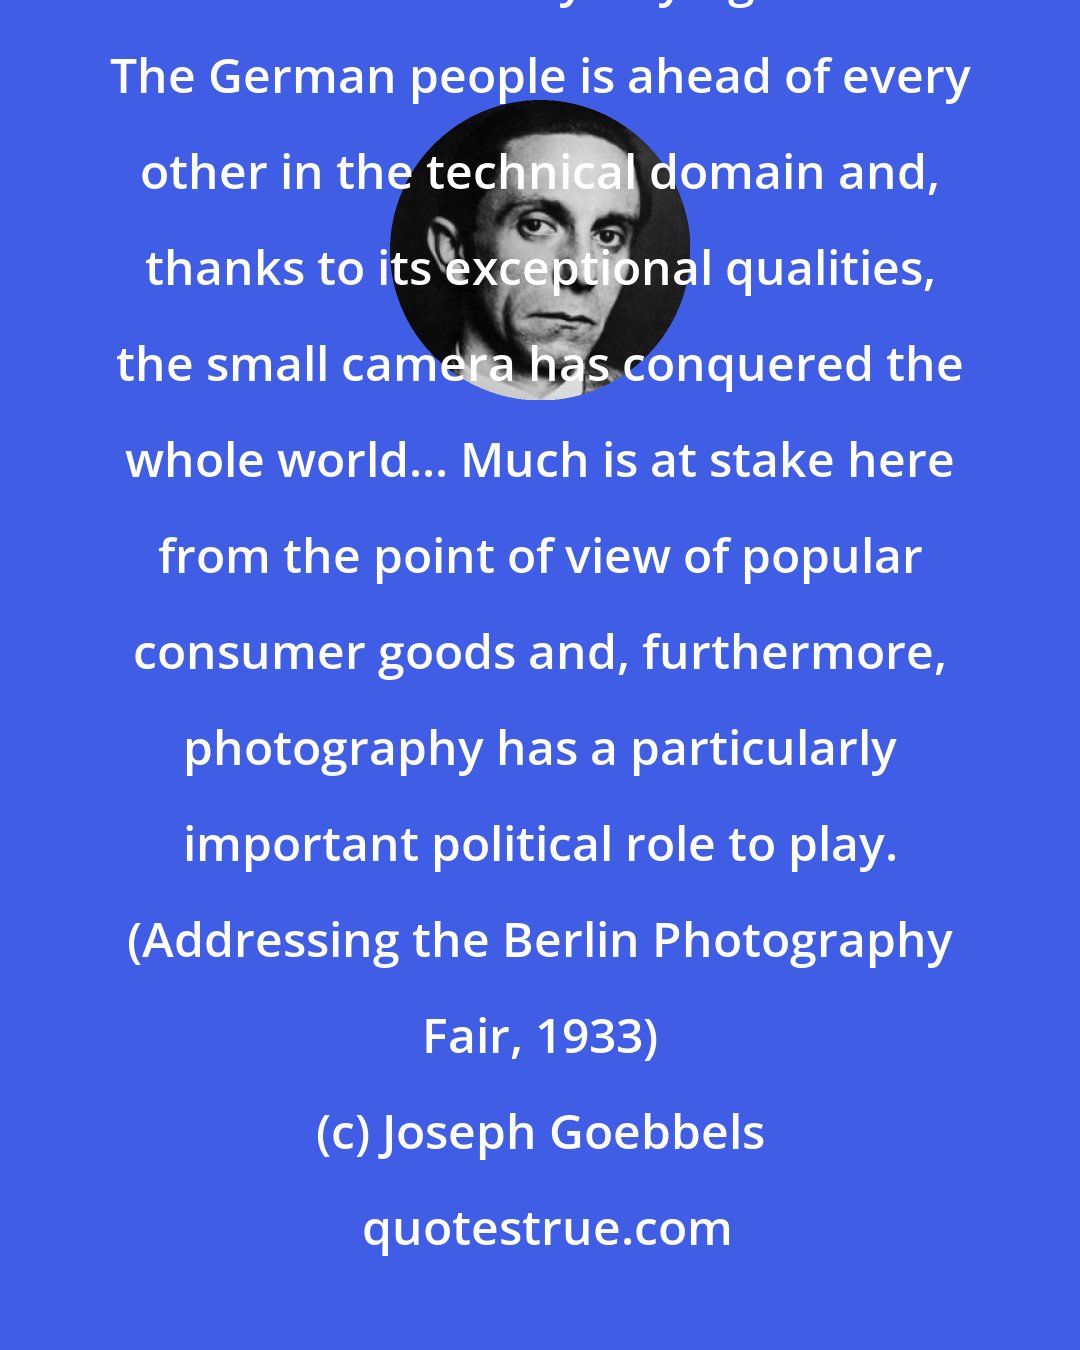 Joseph Goebbels: Photography today is accomplishing a lofty mission in which every German should collaborate by buying a camera. The German people is ahead of every other in the technical domain and, thanks to its exceptional qualities, the small camera has conquered the whole world... Much is at stake here from the point of view of popular consumer goods and, furthermore, photography has a particularly important political role to play. (Addressing the Berlin Photography Fair, 1933)